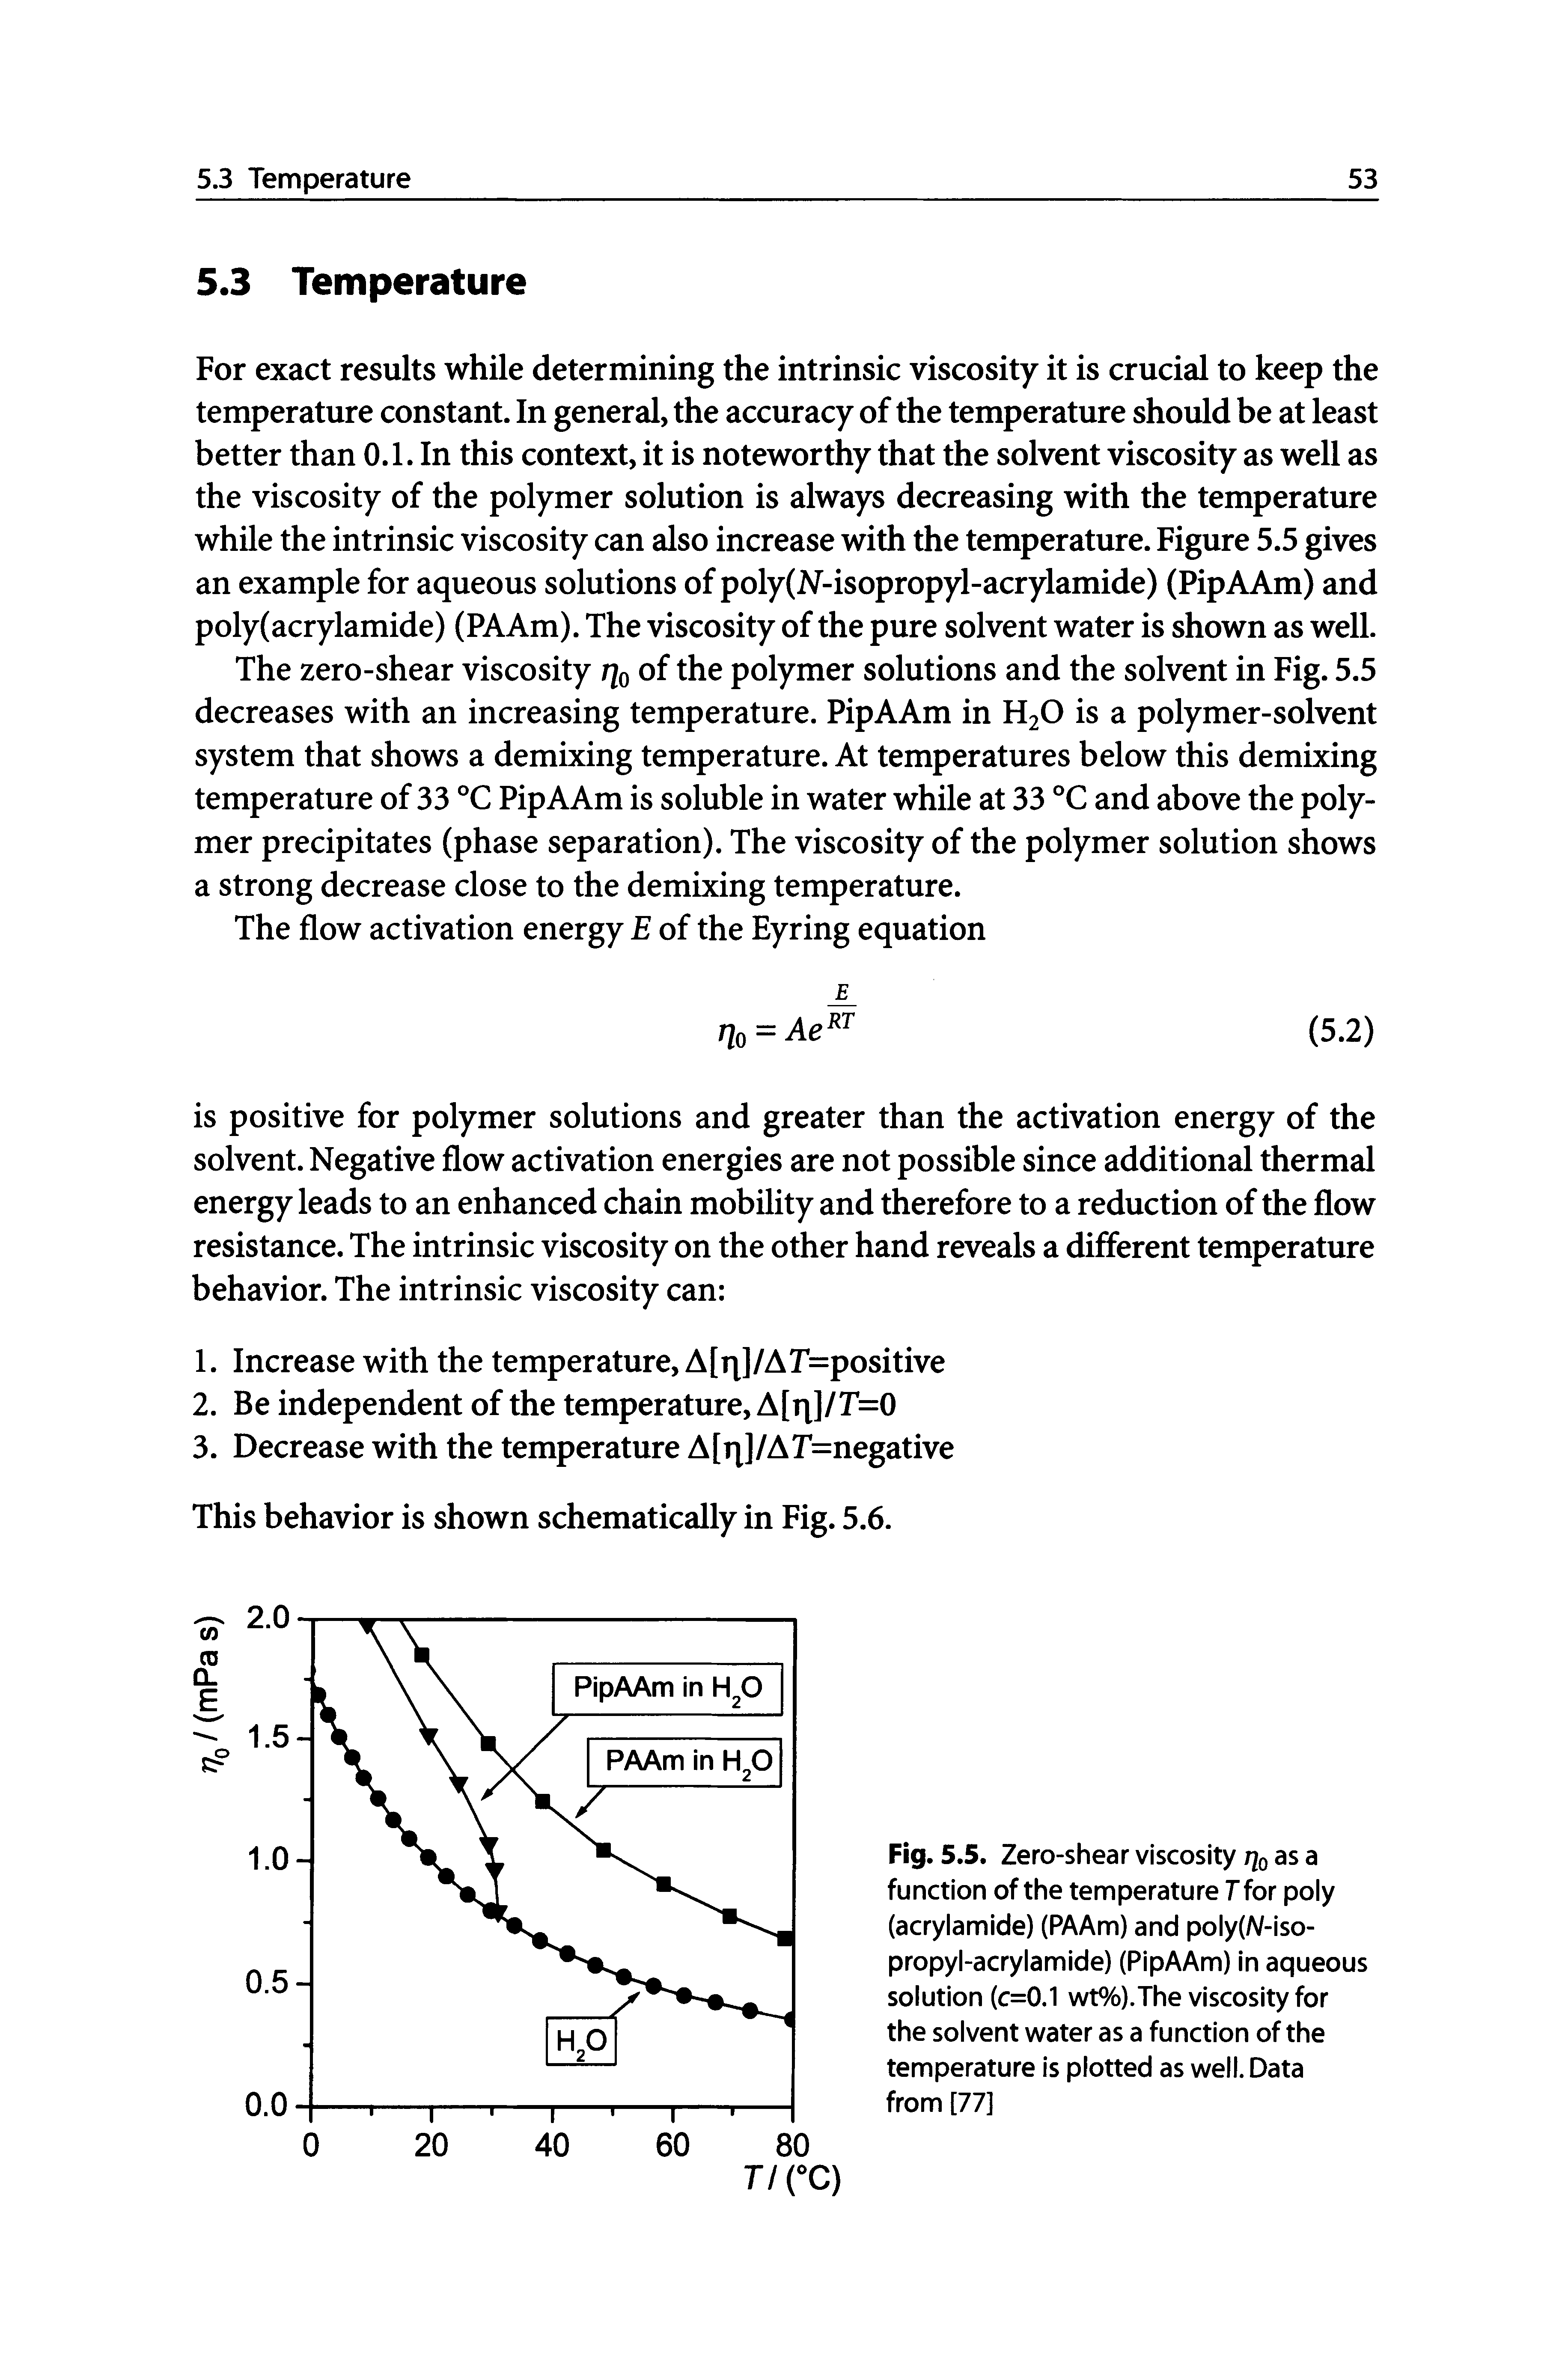 Fig. 5.5. Zero-shear viscosity qQ as a function of the temperature T for poly (acrylamide) (PAAm) and poly(A/-iso-propyl-acrylamide) (PipAAm) In aqueous solution (c=0.1 wt%).The viscosity for the solvent water as a function of the temperature Is plotted as well. Data from [77]...